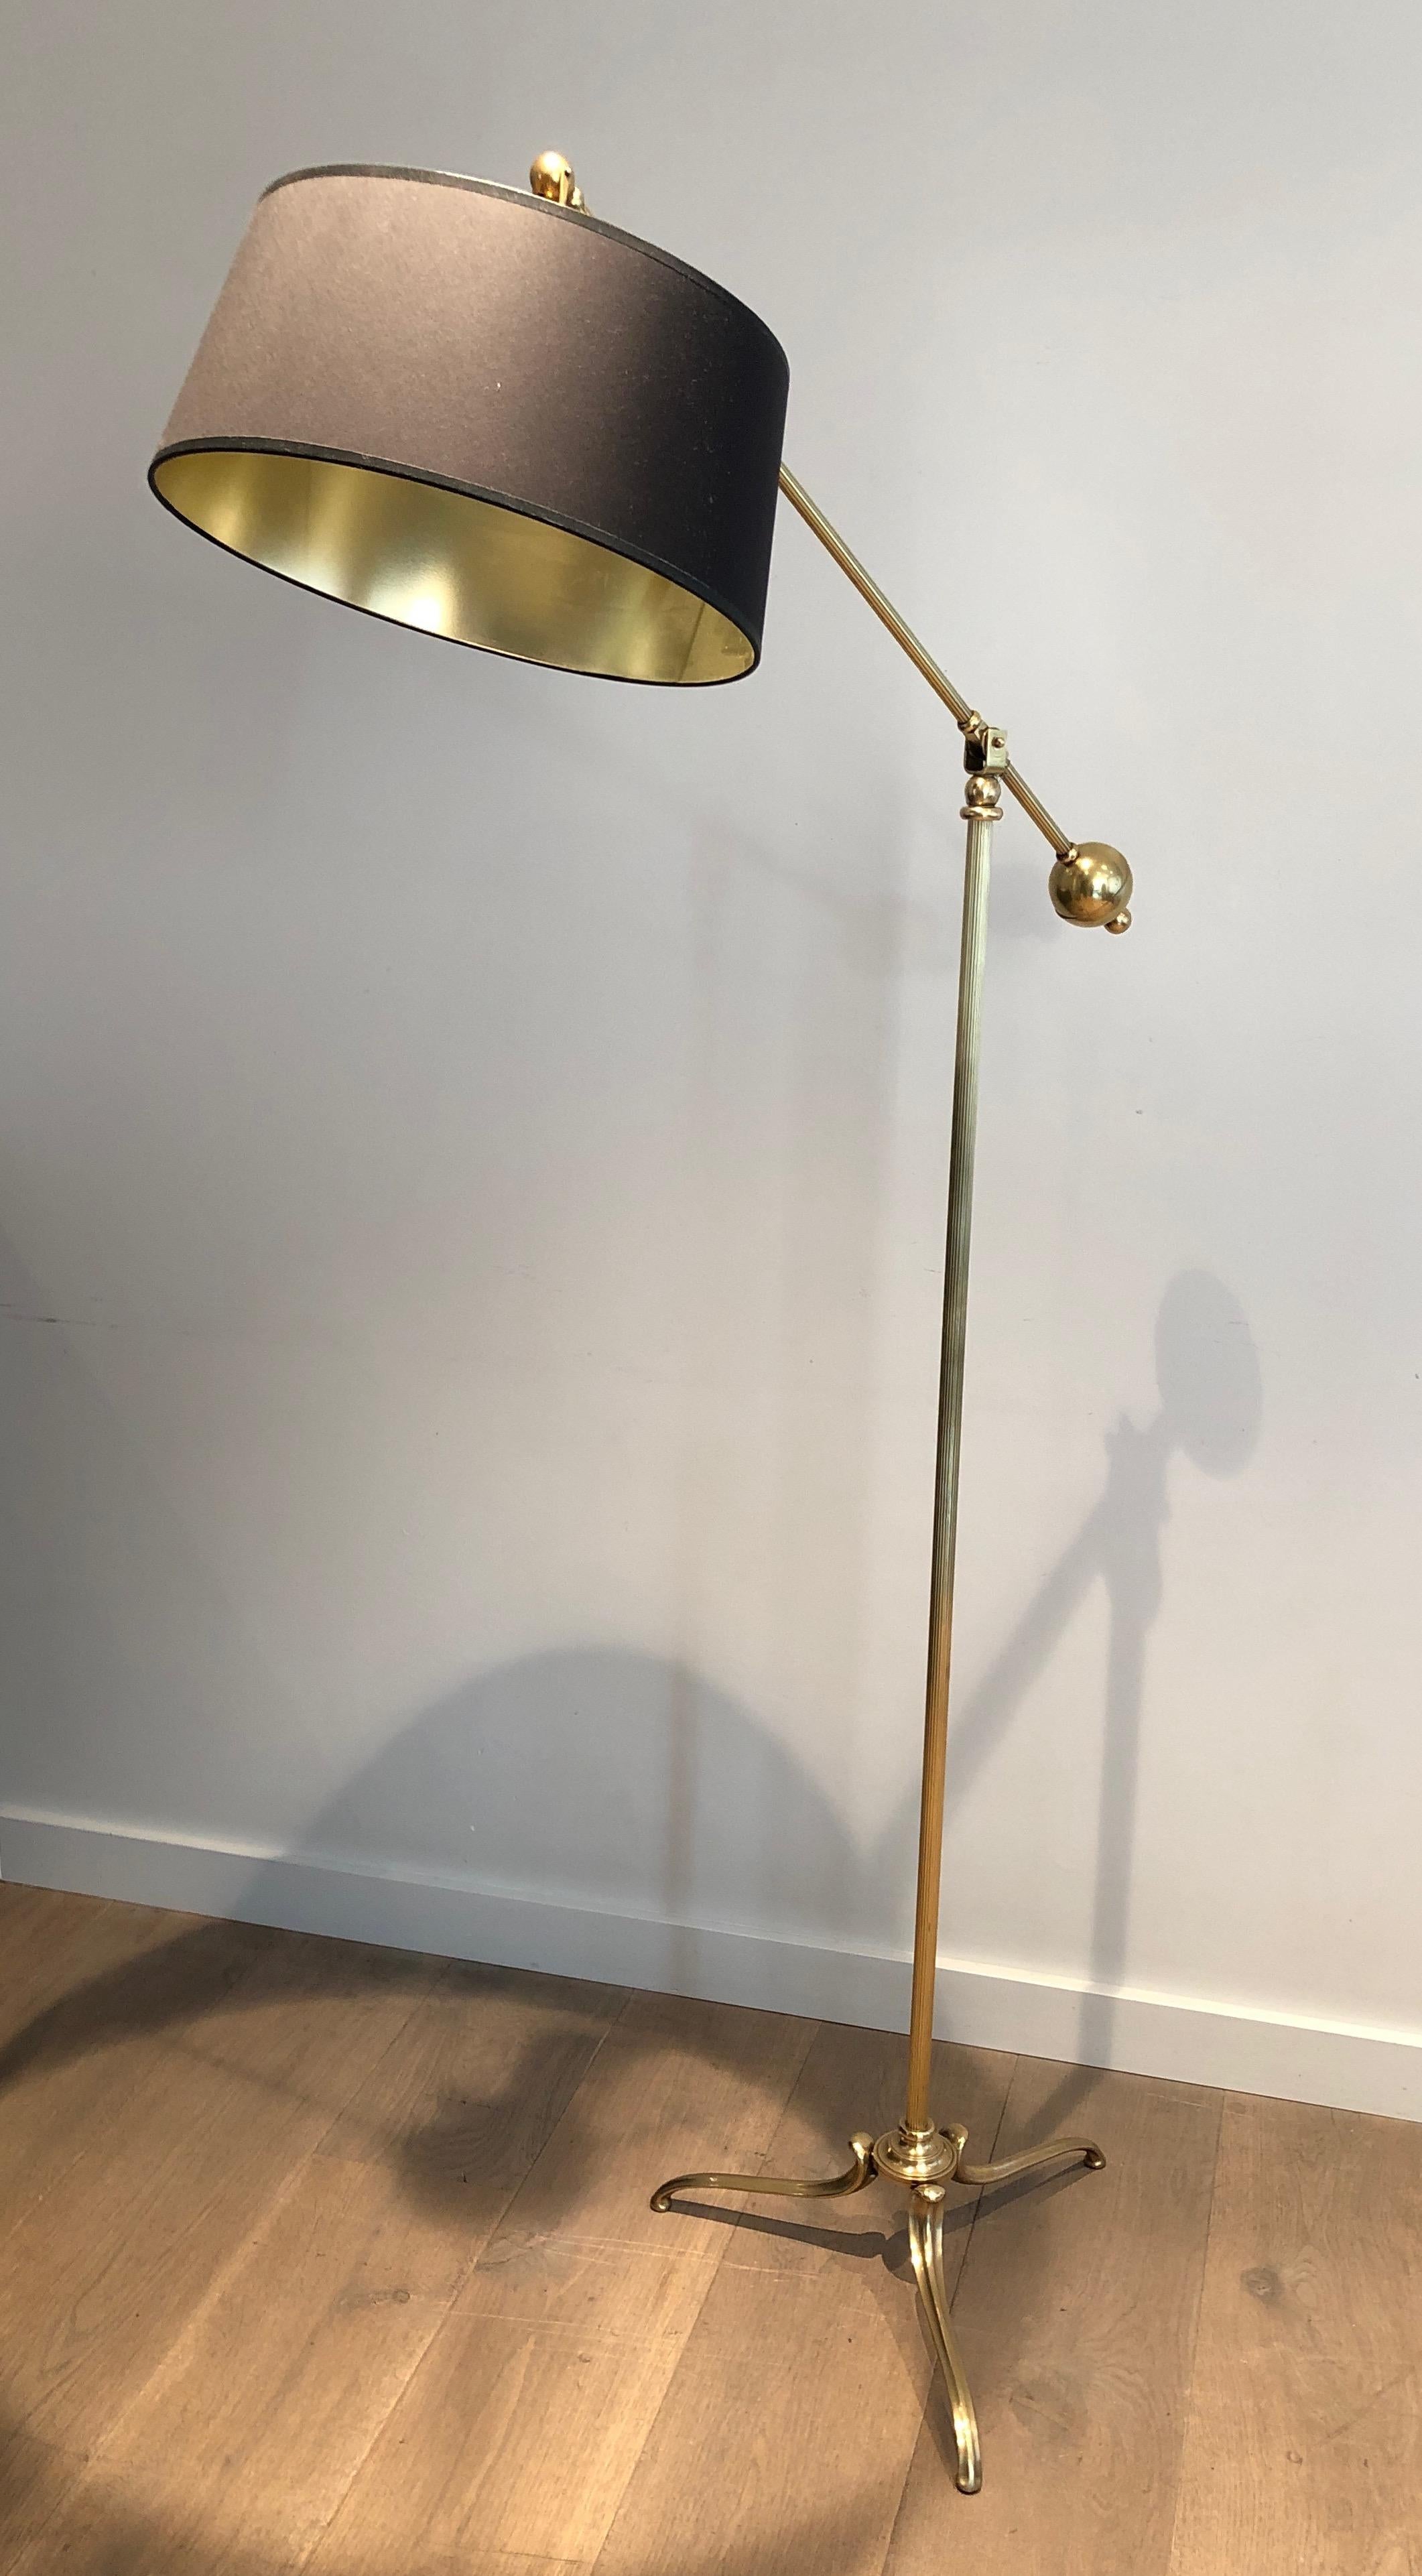 This rare pendulum floor lamp is all made of brass. This is a very unusual model by a French designer, circa 1940.